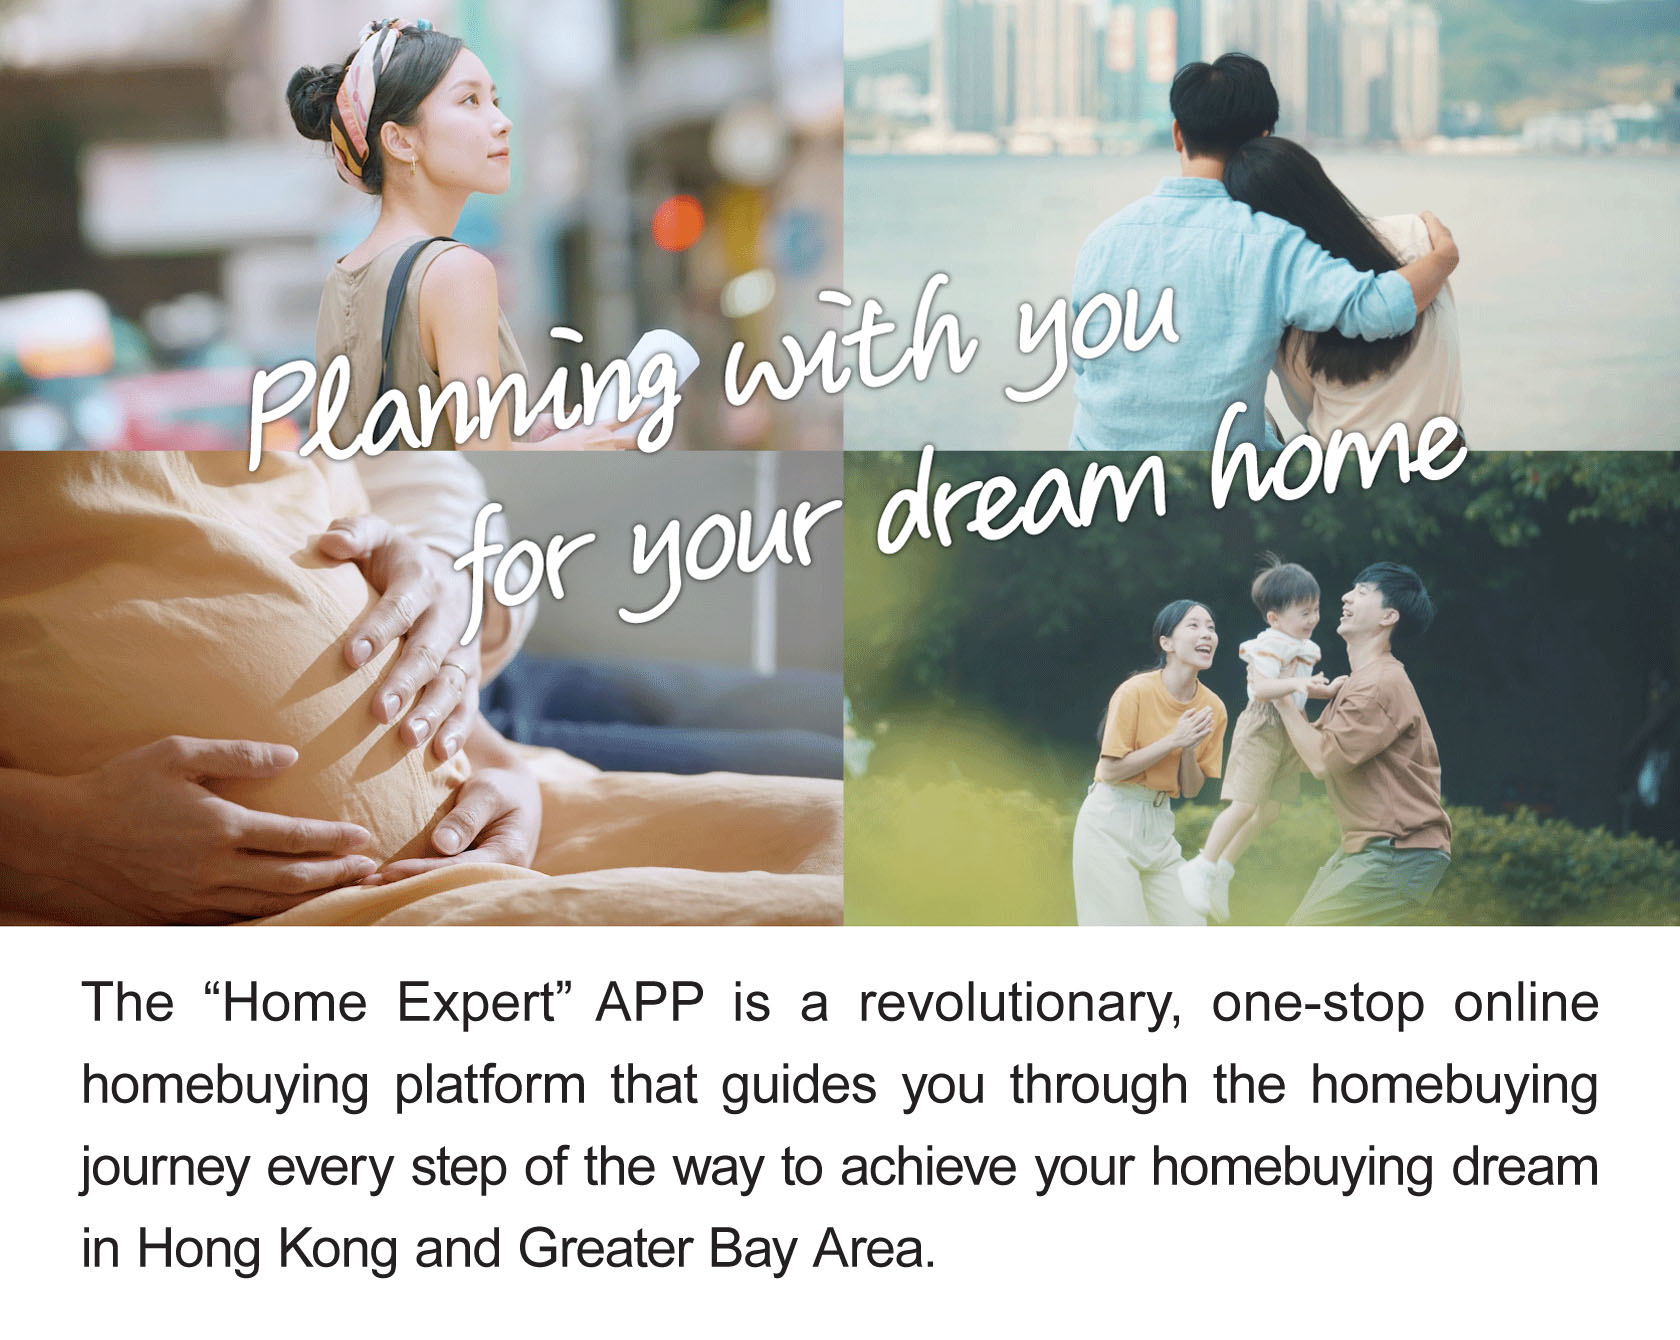 Planing with You for your dream home